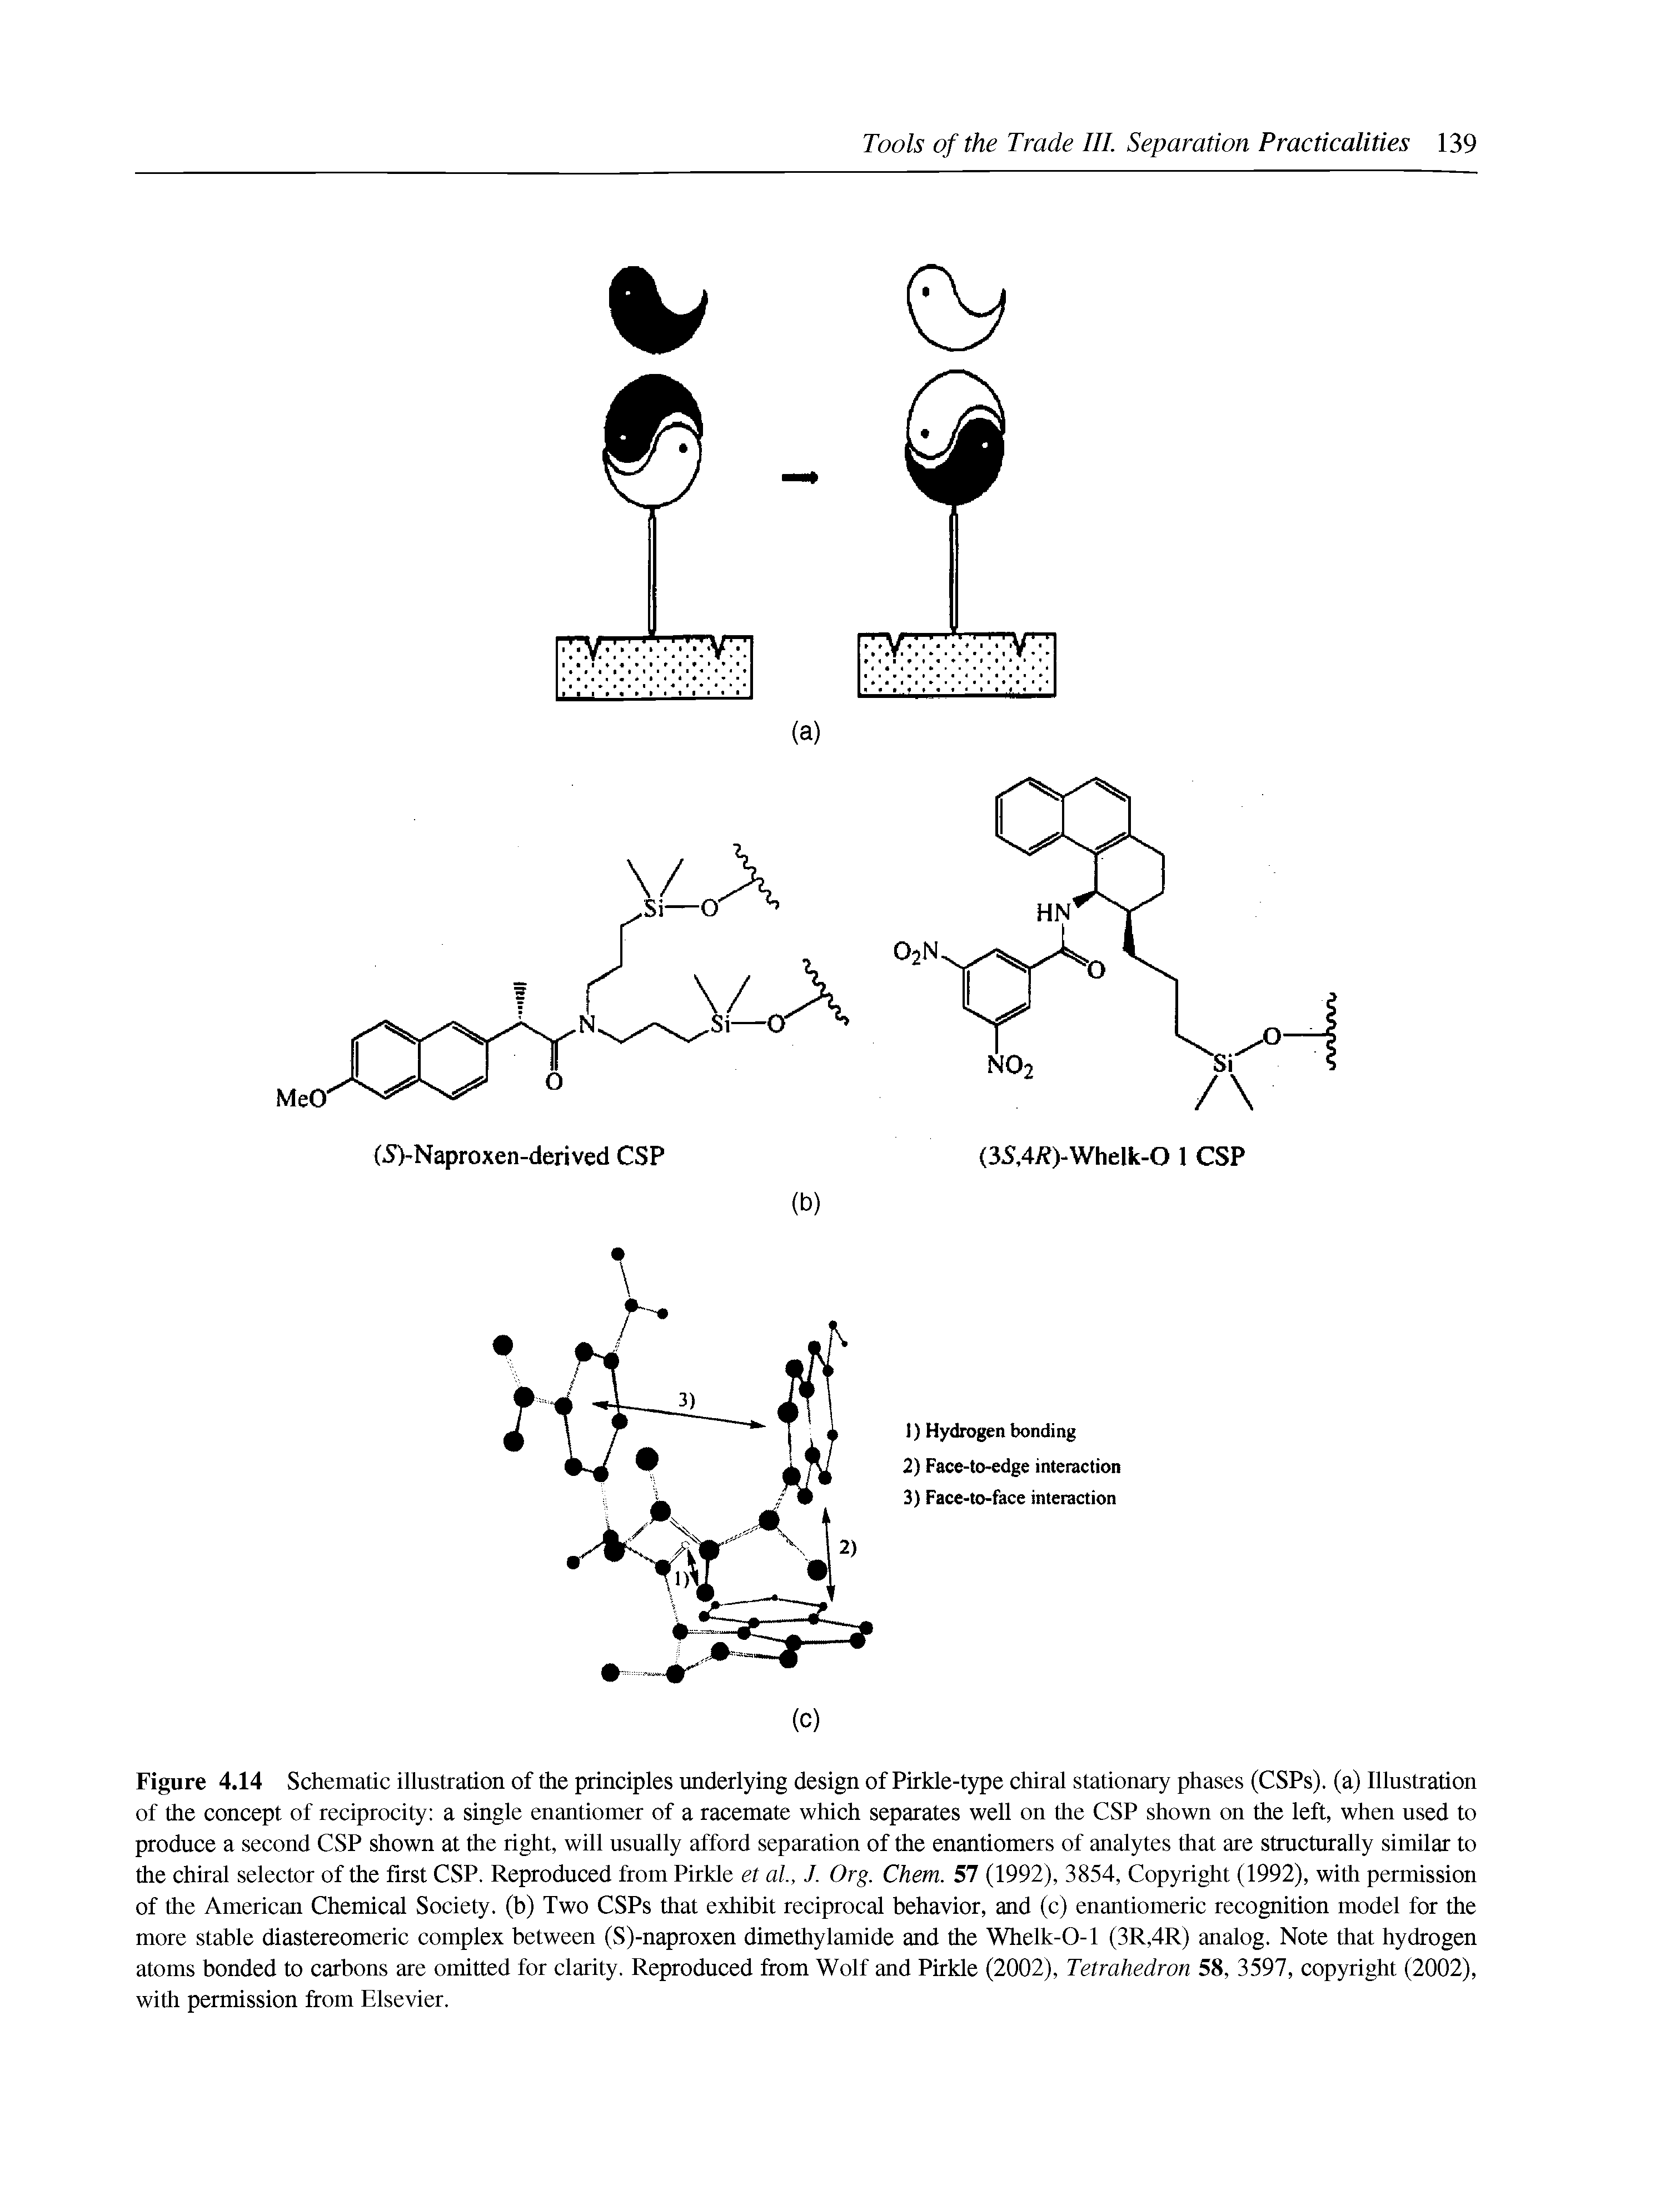 Figure 4.14 Schematic illustration of the principles underlying design of Pirkle-type chiral stationary phases (CSPs). (a) Illustration of the concept of reciprocity a single enantiomer of a racemate which separates well on the CSP shown on the left, when used to produce a second CSP shown at the right, will usually afford separation of the enantiomers of analytes that are structurally similar to the chiral selector of the first CSP. Reproduced from Pirkle et al, J. Org. Chem. 57 (1992), 3854, Copyright (1992), with permission of the American Chemical Society, (b) Two CSPs that exhibit reciprocal behavior, and (c) enantiomeric recognition model for the more stable diastereomeric complex between (S)-naproxen dimethylamide and the Whelk-0-1 (3R,4R) analog. Note that hydrogen atoms bonded to carbons are omitted for clarity. Reproduced from Wolf and Pirkle (2002), Tetrahedron 58, 3597, copyright (2002), with permission from Elsevier.